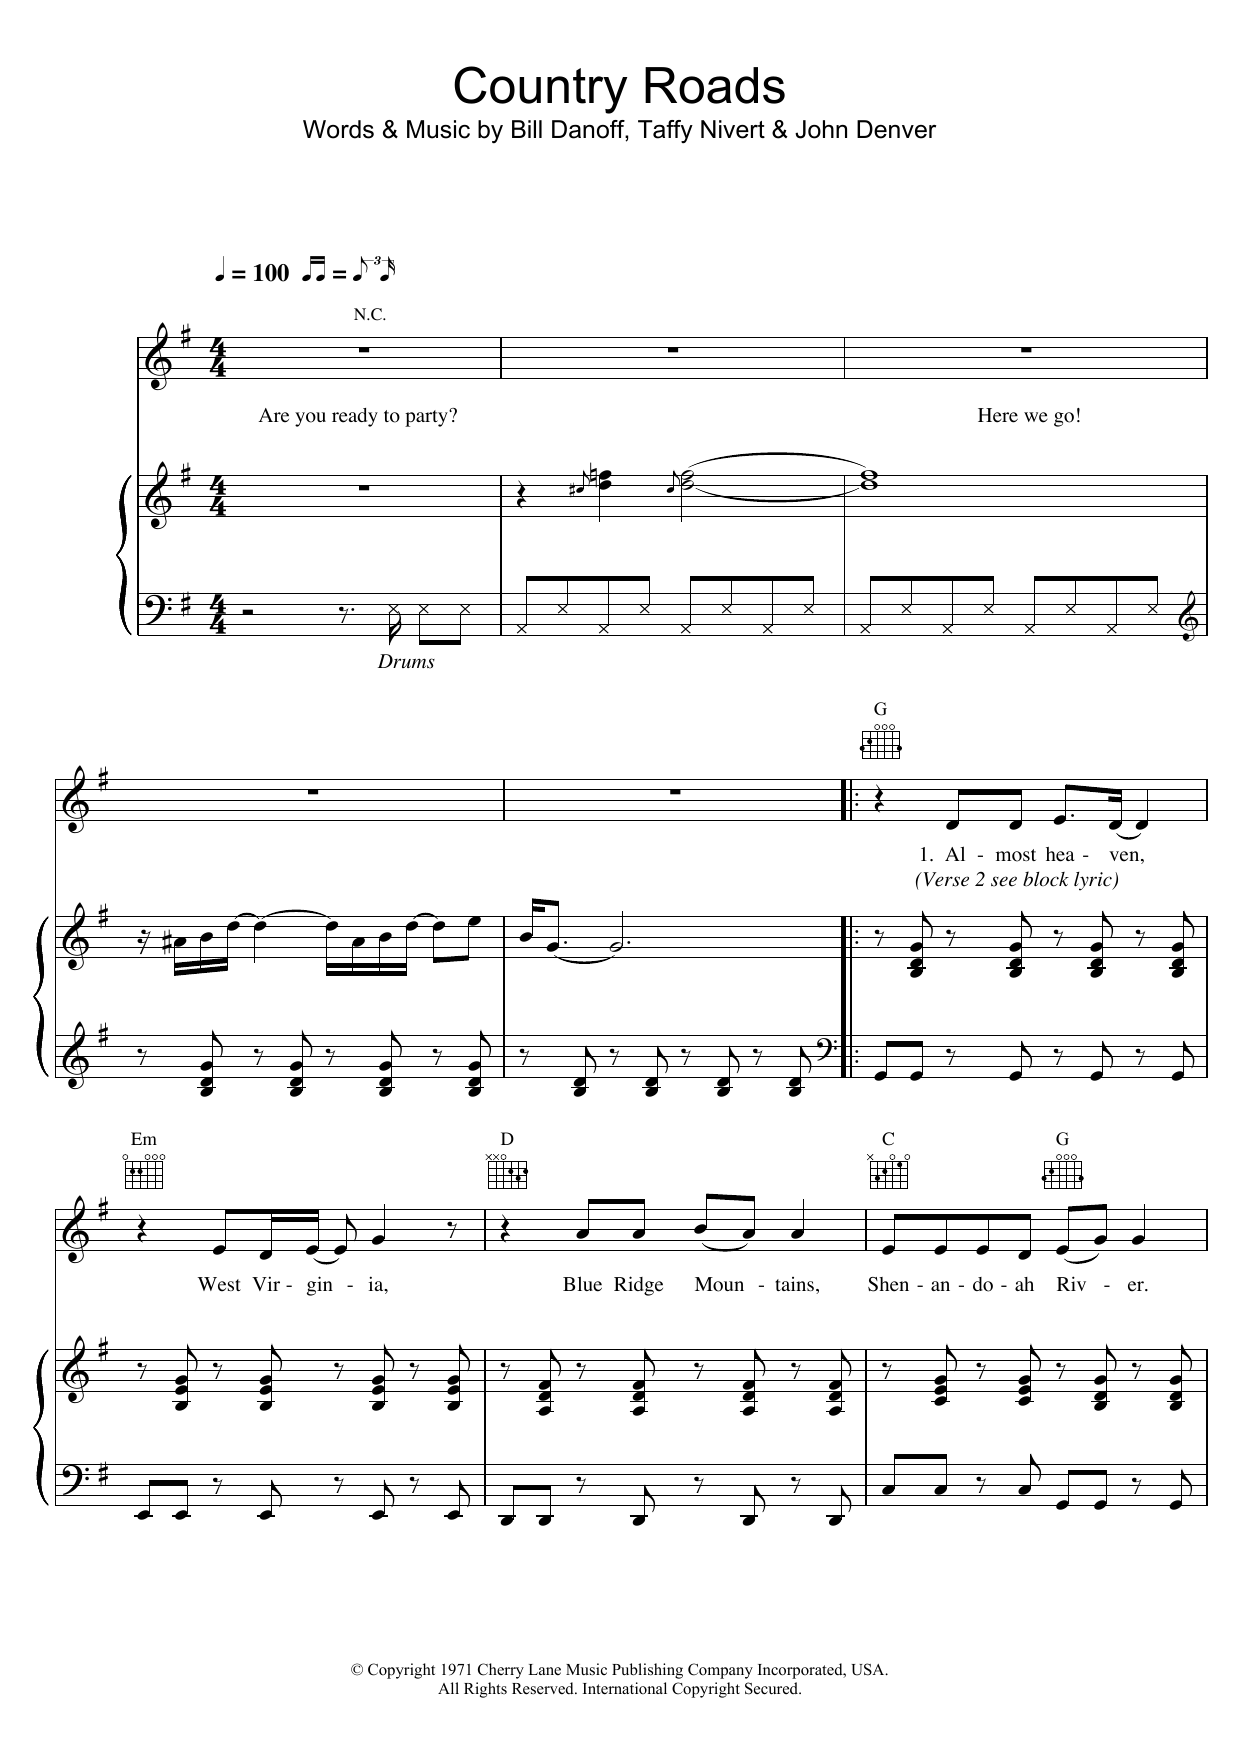 Download Hermes House Band Country Road Sheet Music